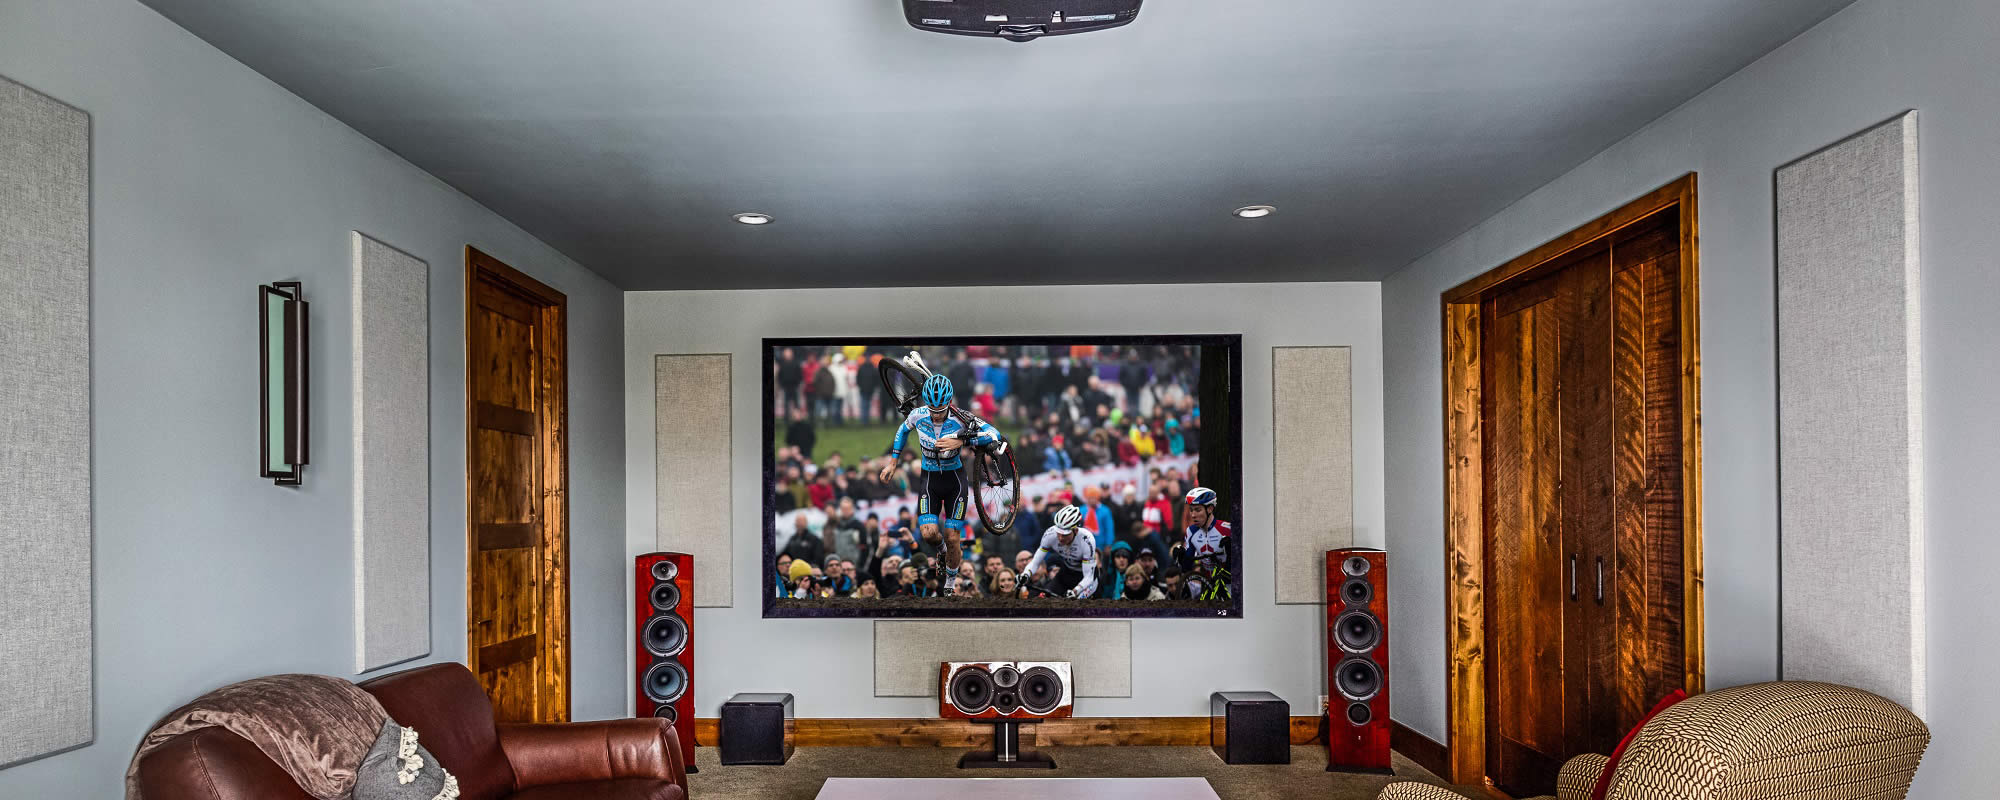 home theater, A/V system, acoustic panels, home automation